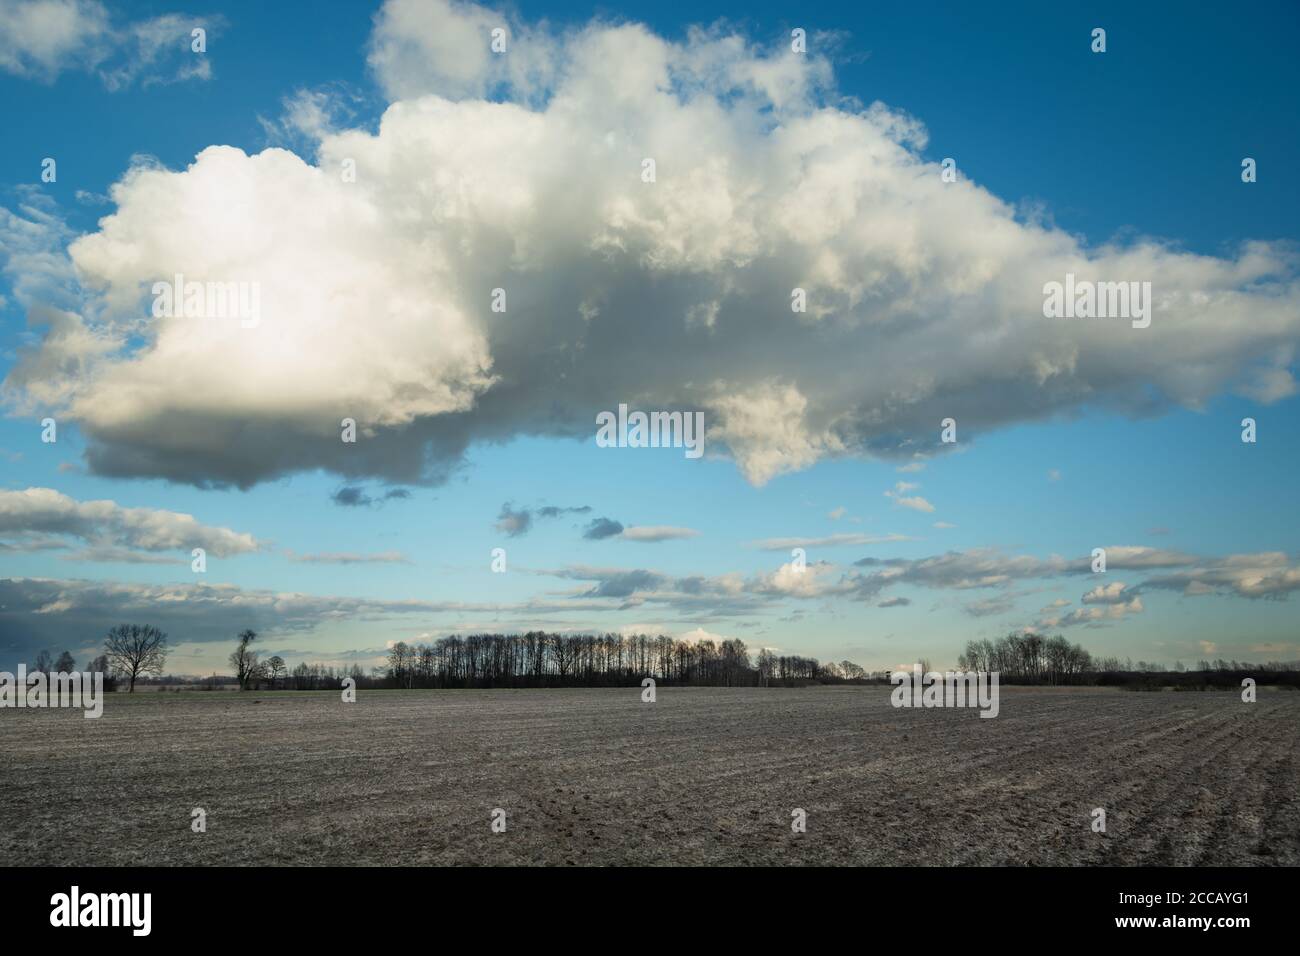 A white gray big cloud over a ploughed field Stock Photo